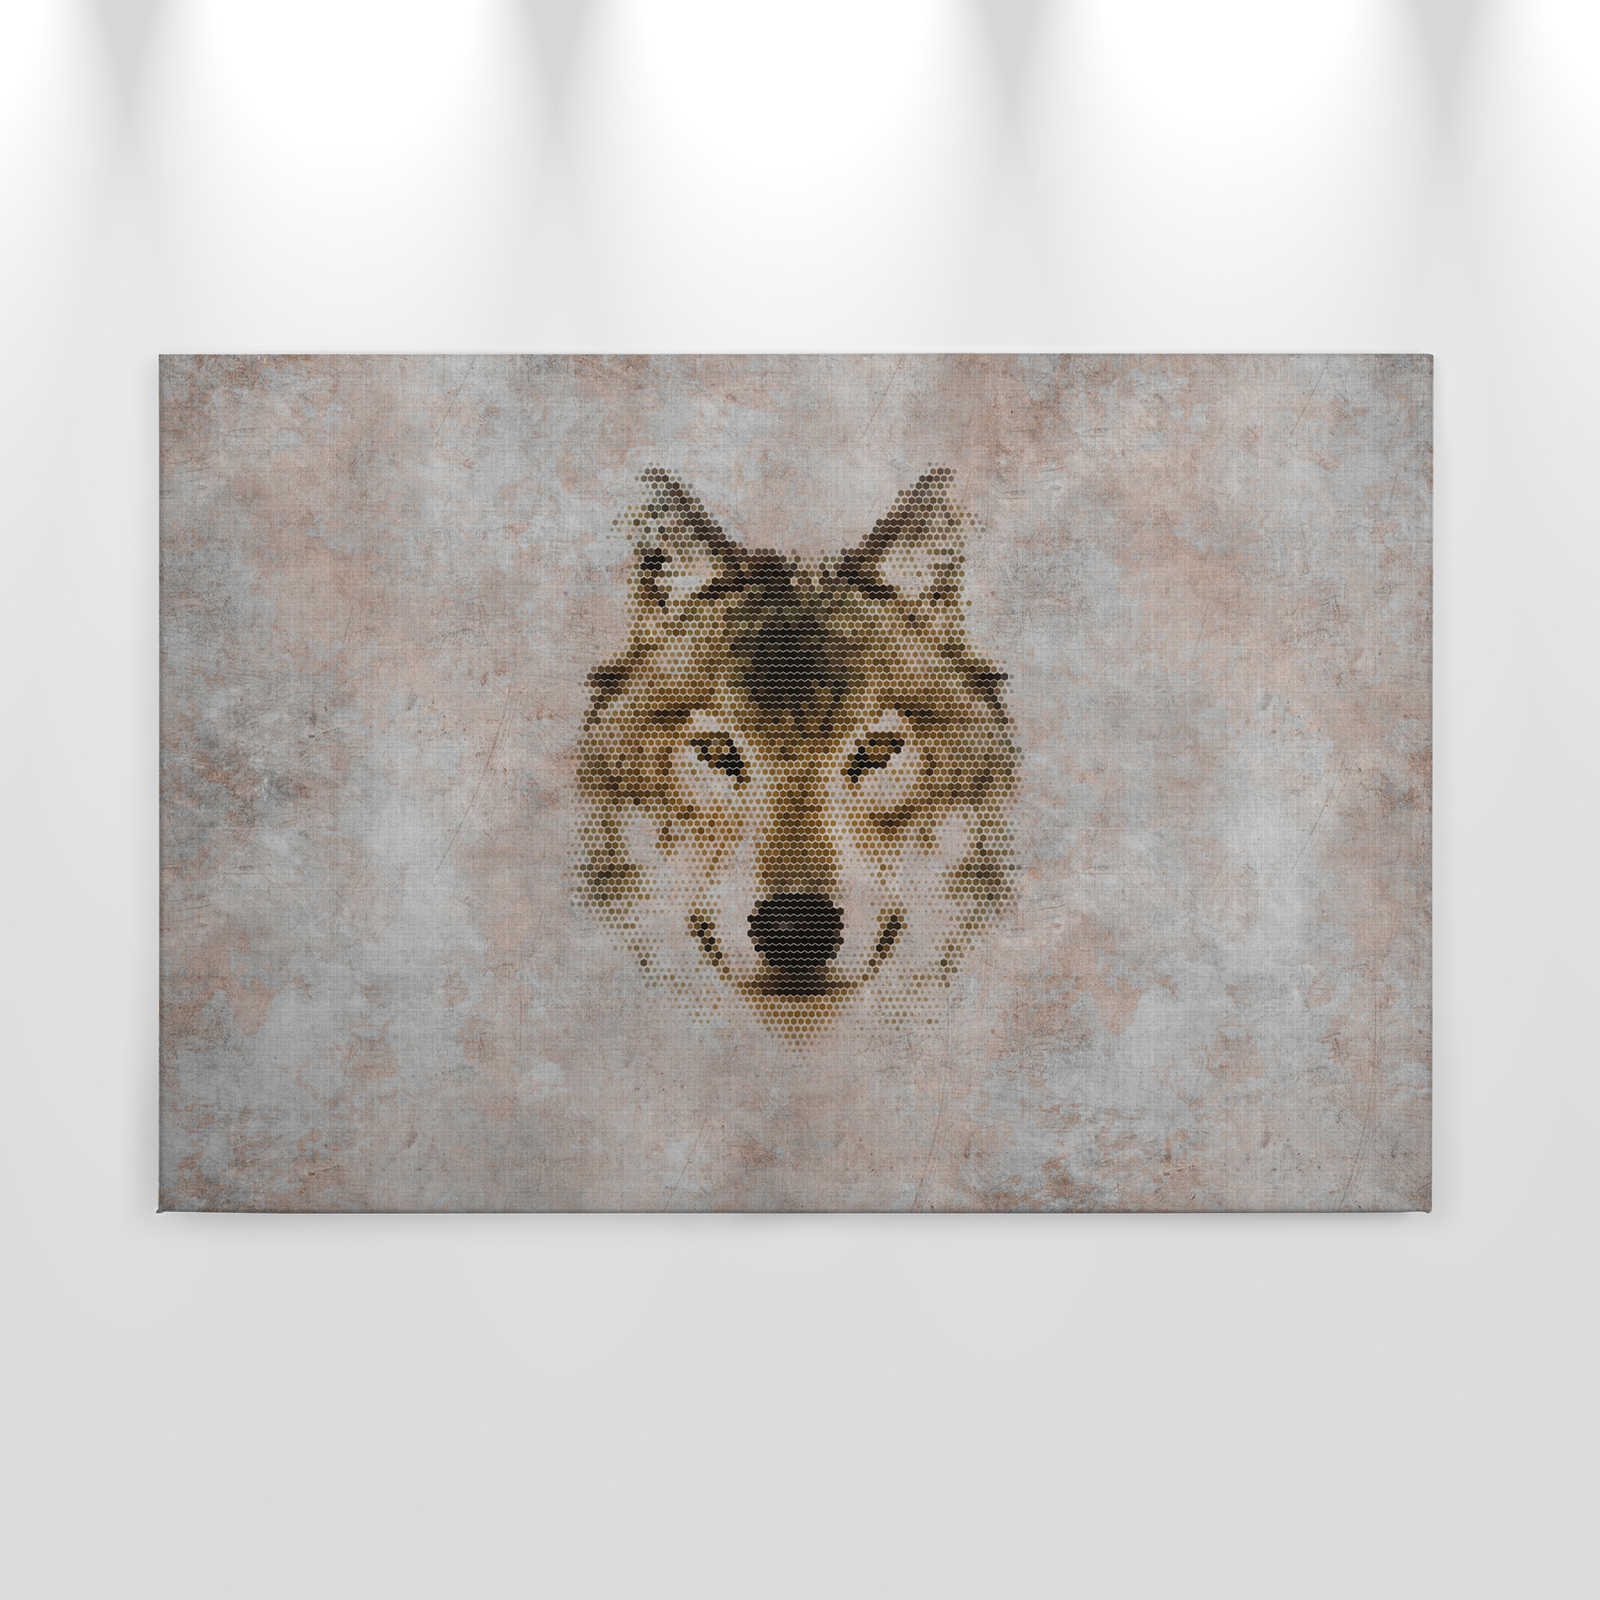             Big three 1 - Concrete-look canvas picture with wolf - natural linen structure - 0.90 m x 0.60 m
        